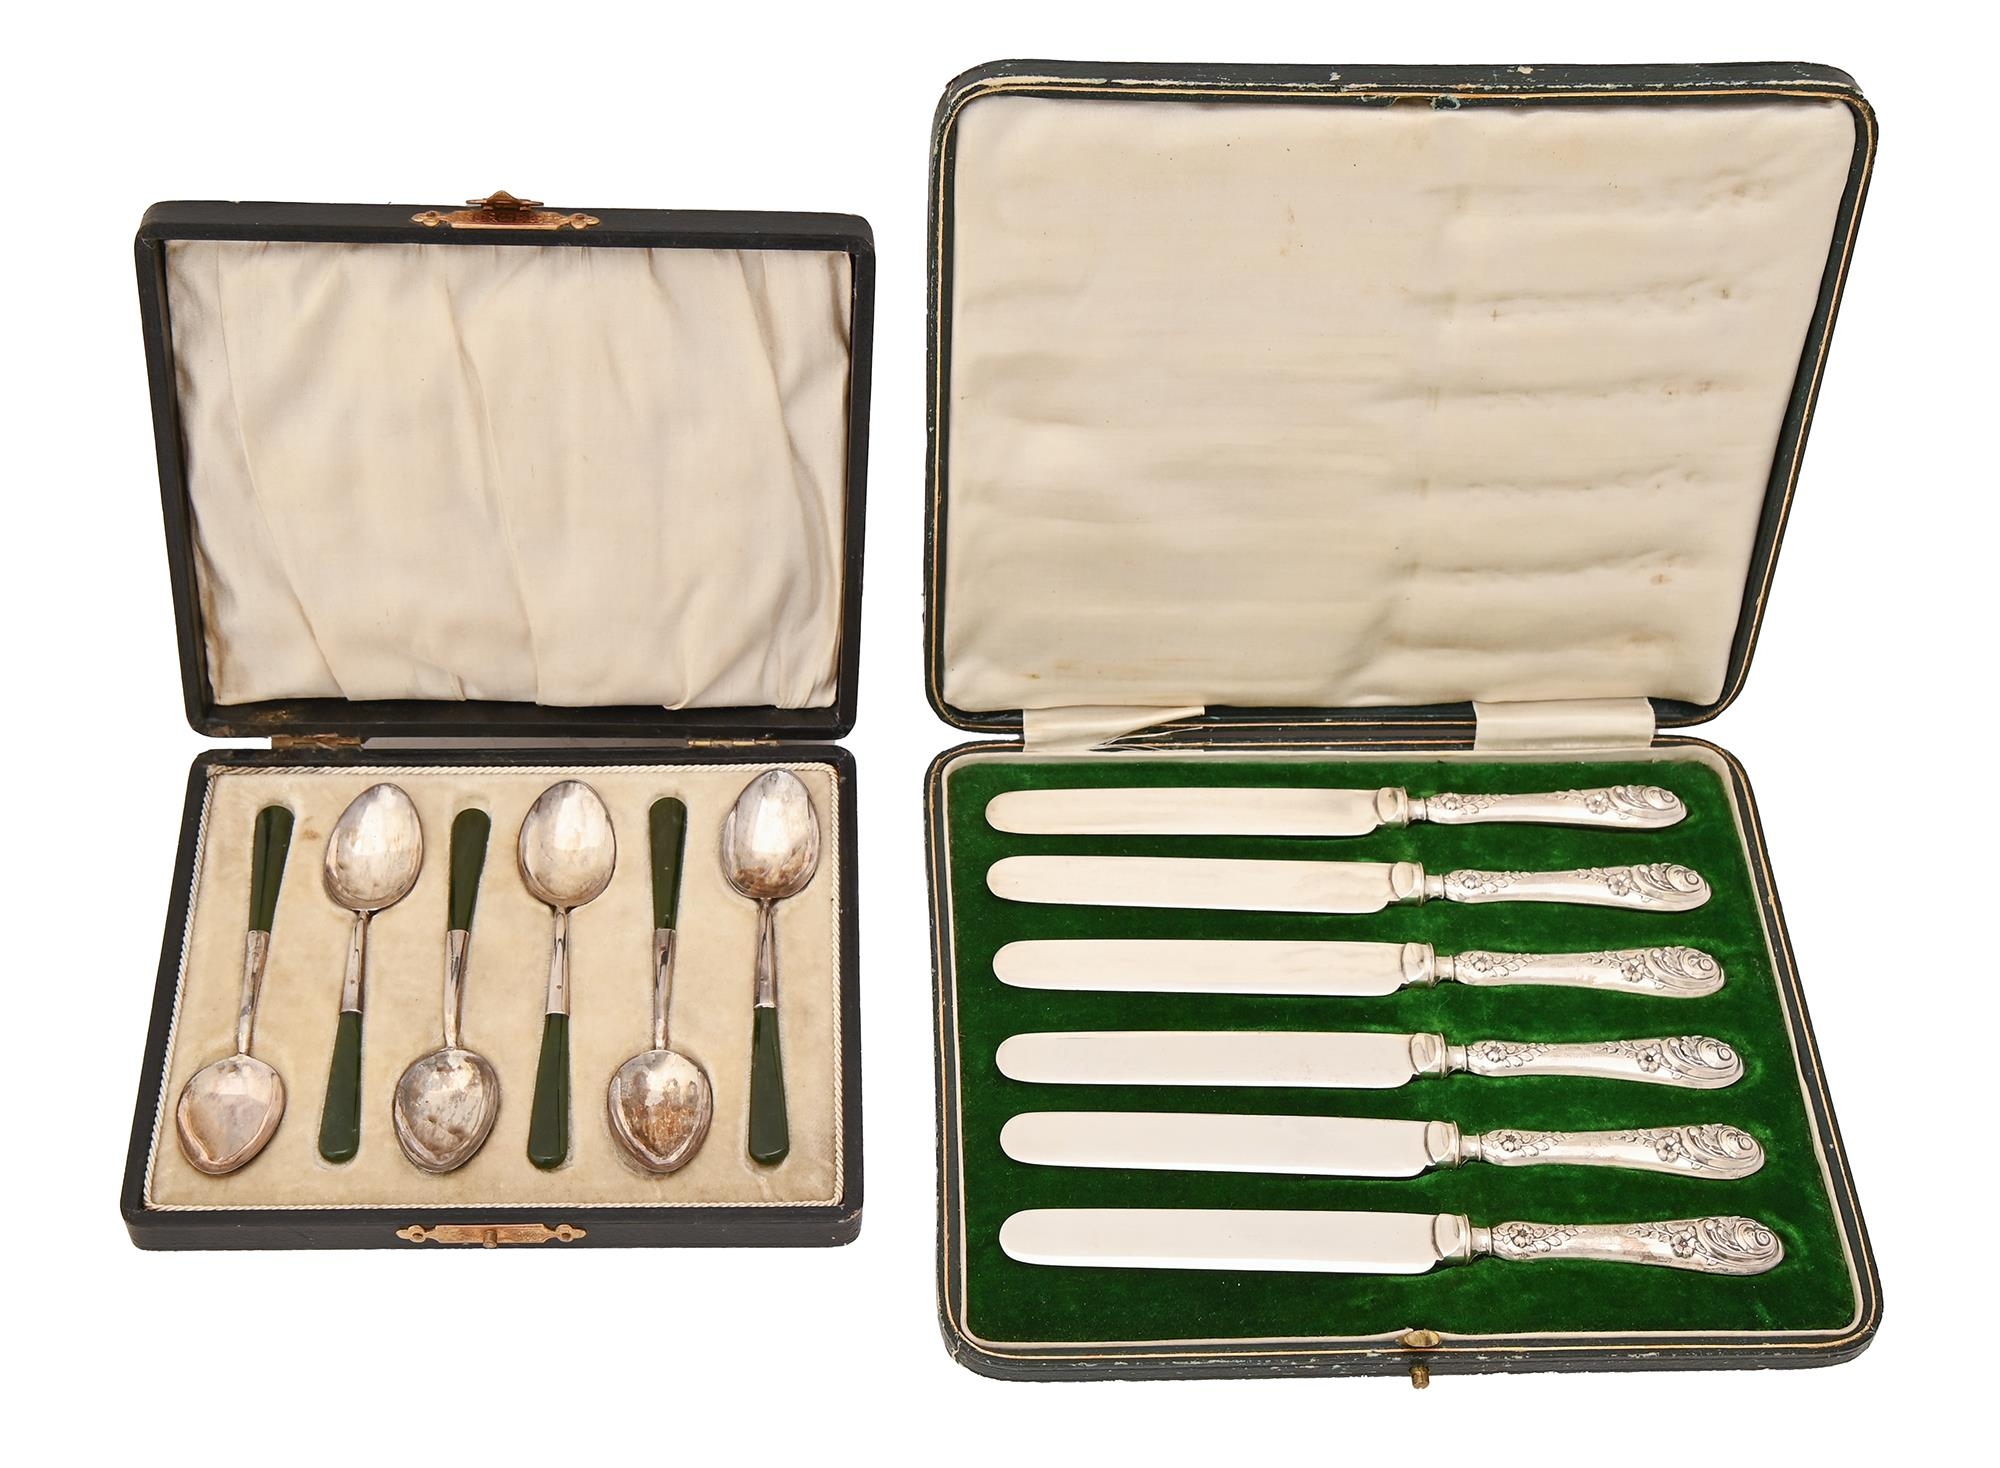 A set of six George V nephrite handled silver coffee spoons, by William Devenport, Birmingham